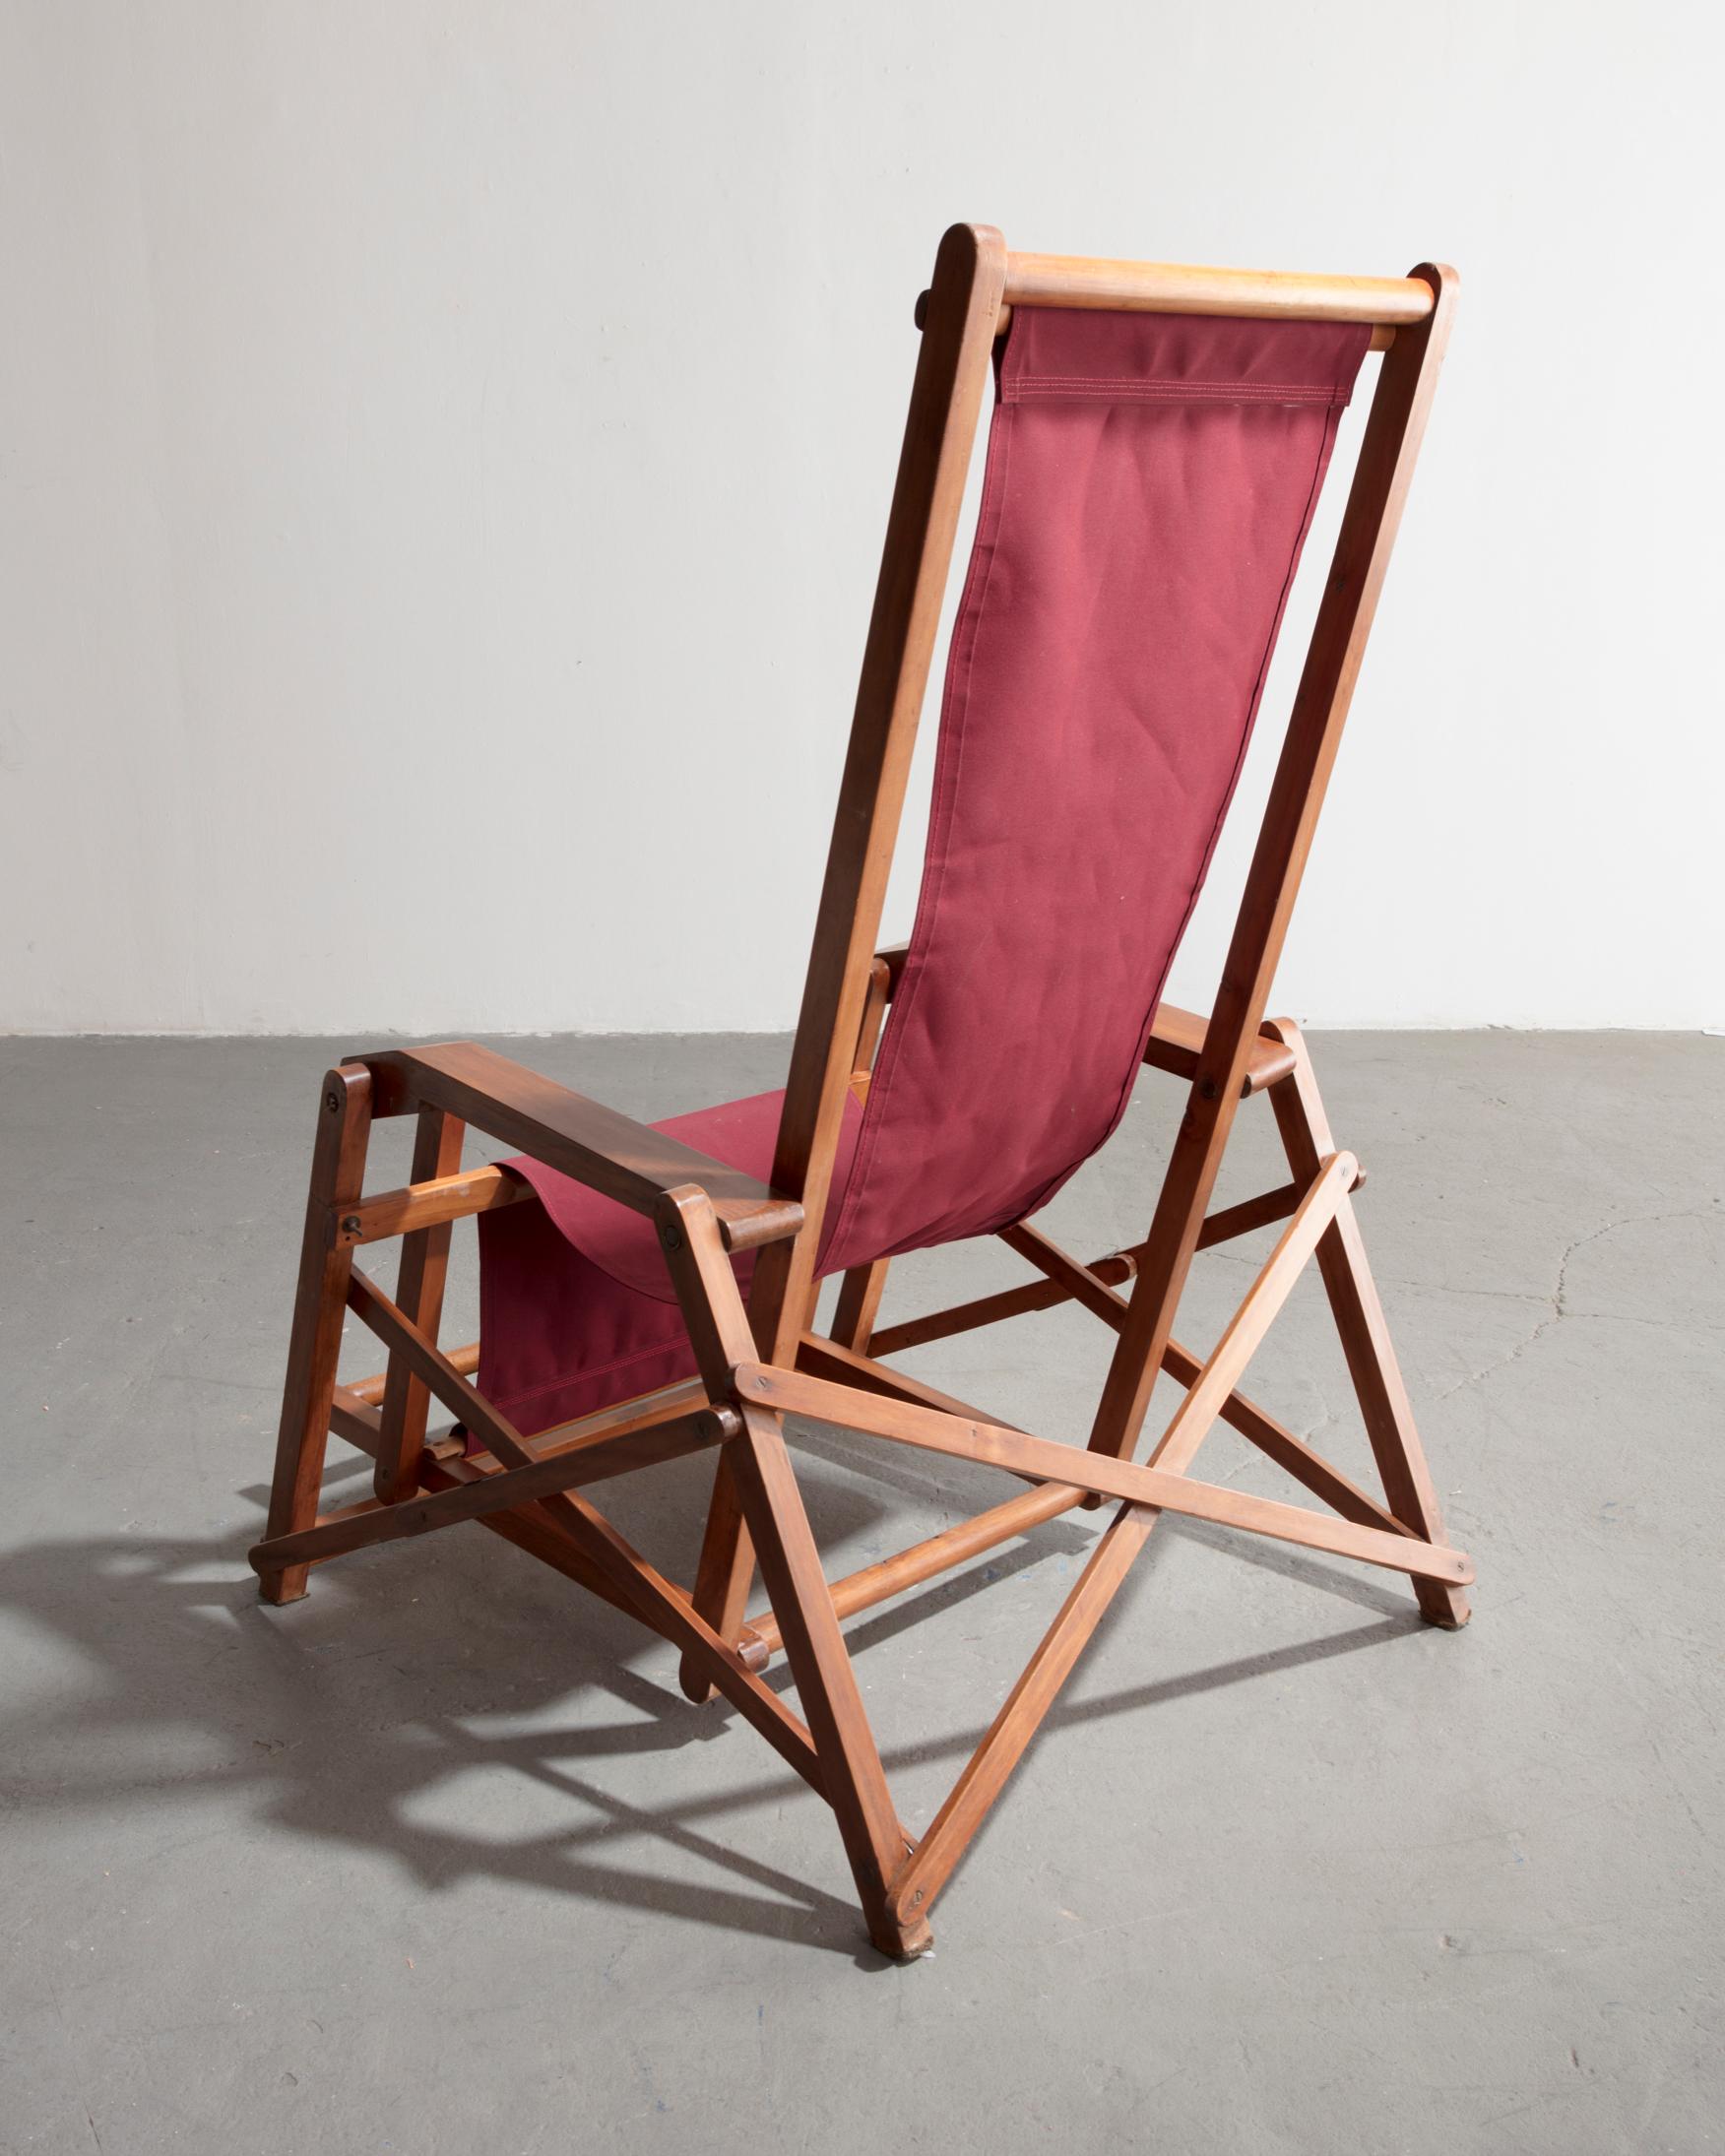 Lounge chair with slung canvas seat on wooden frame. Designed by Lucio Costa, Brazil, 1960s.